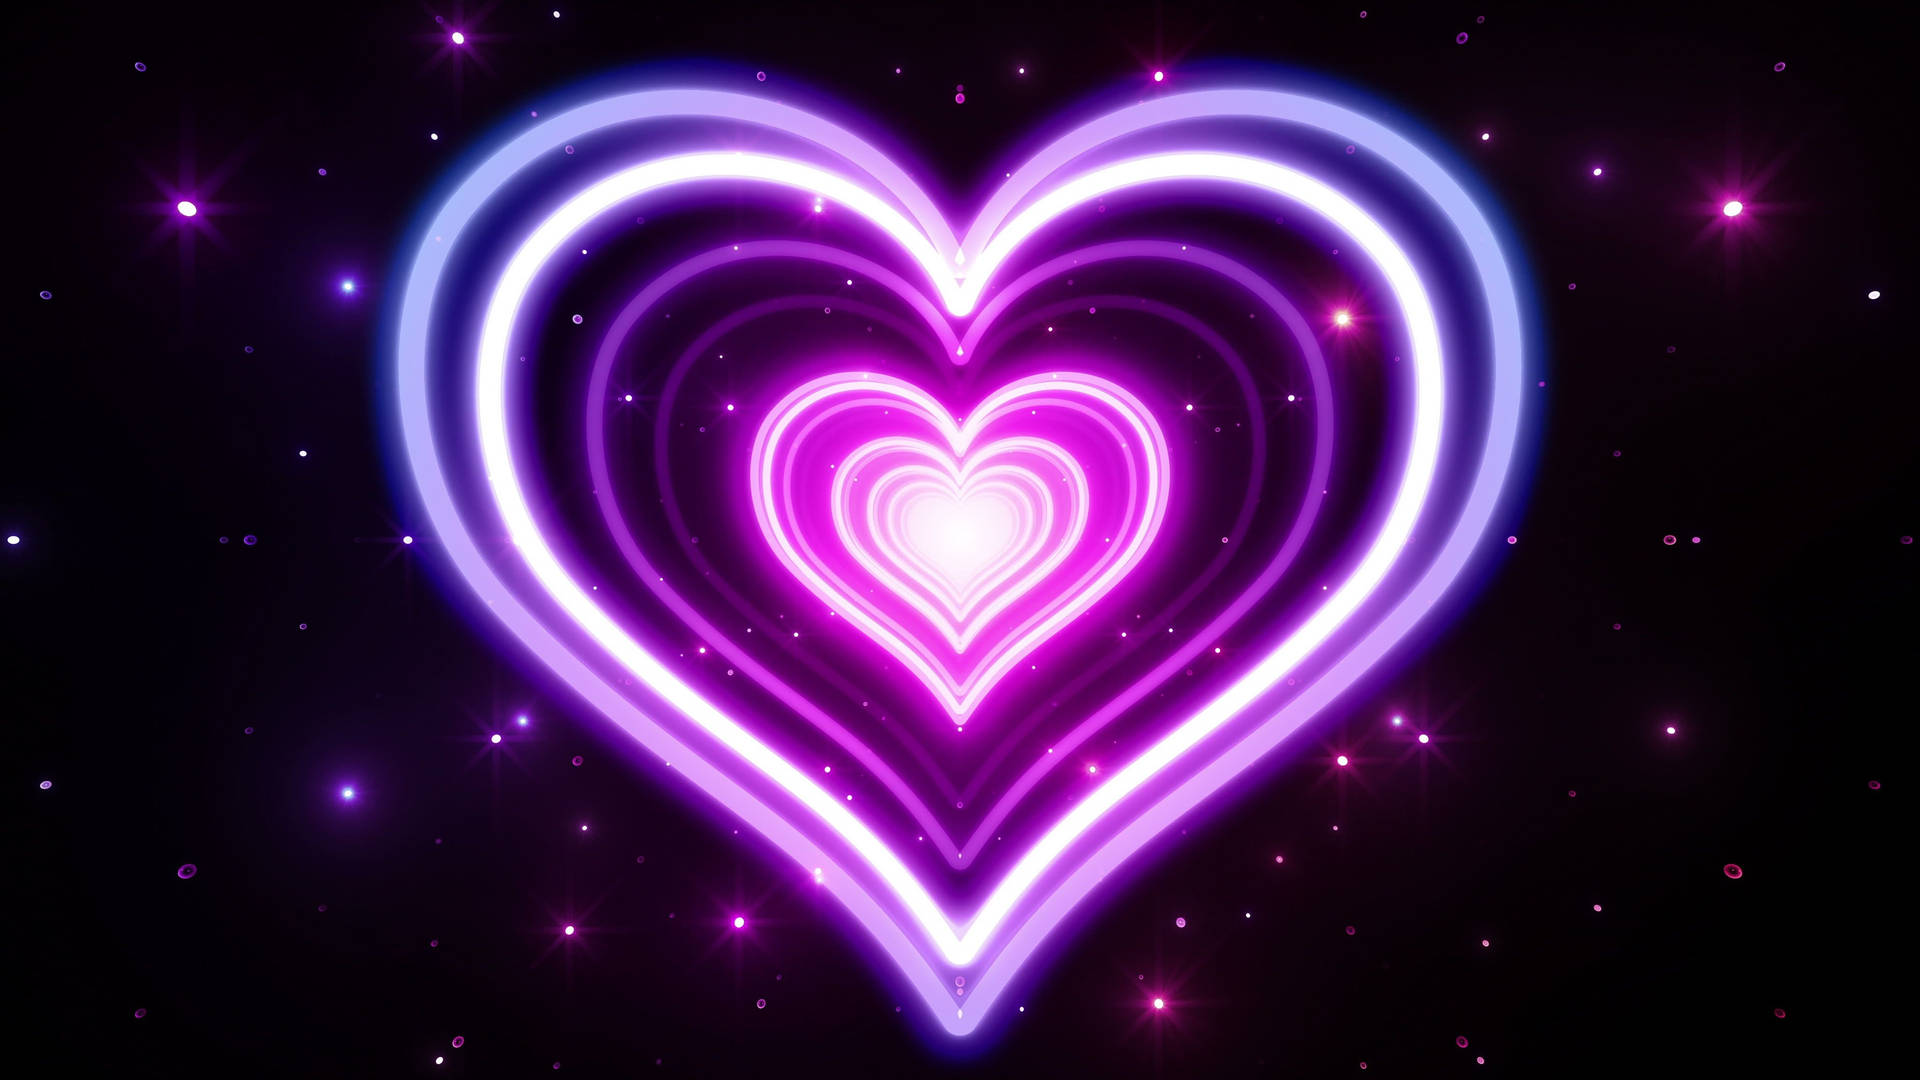 A Heart Shaped Neon Light On A Black Background Wallpaper